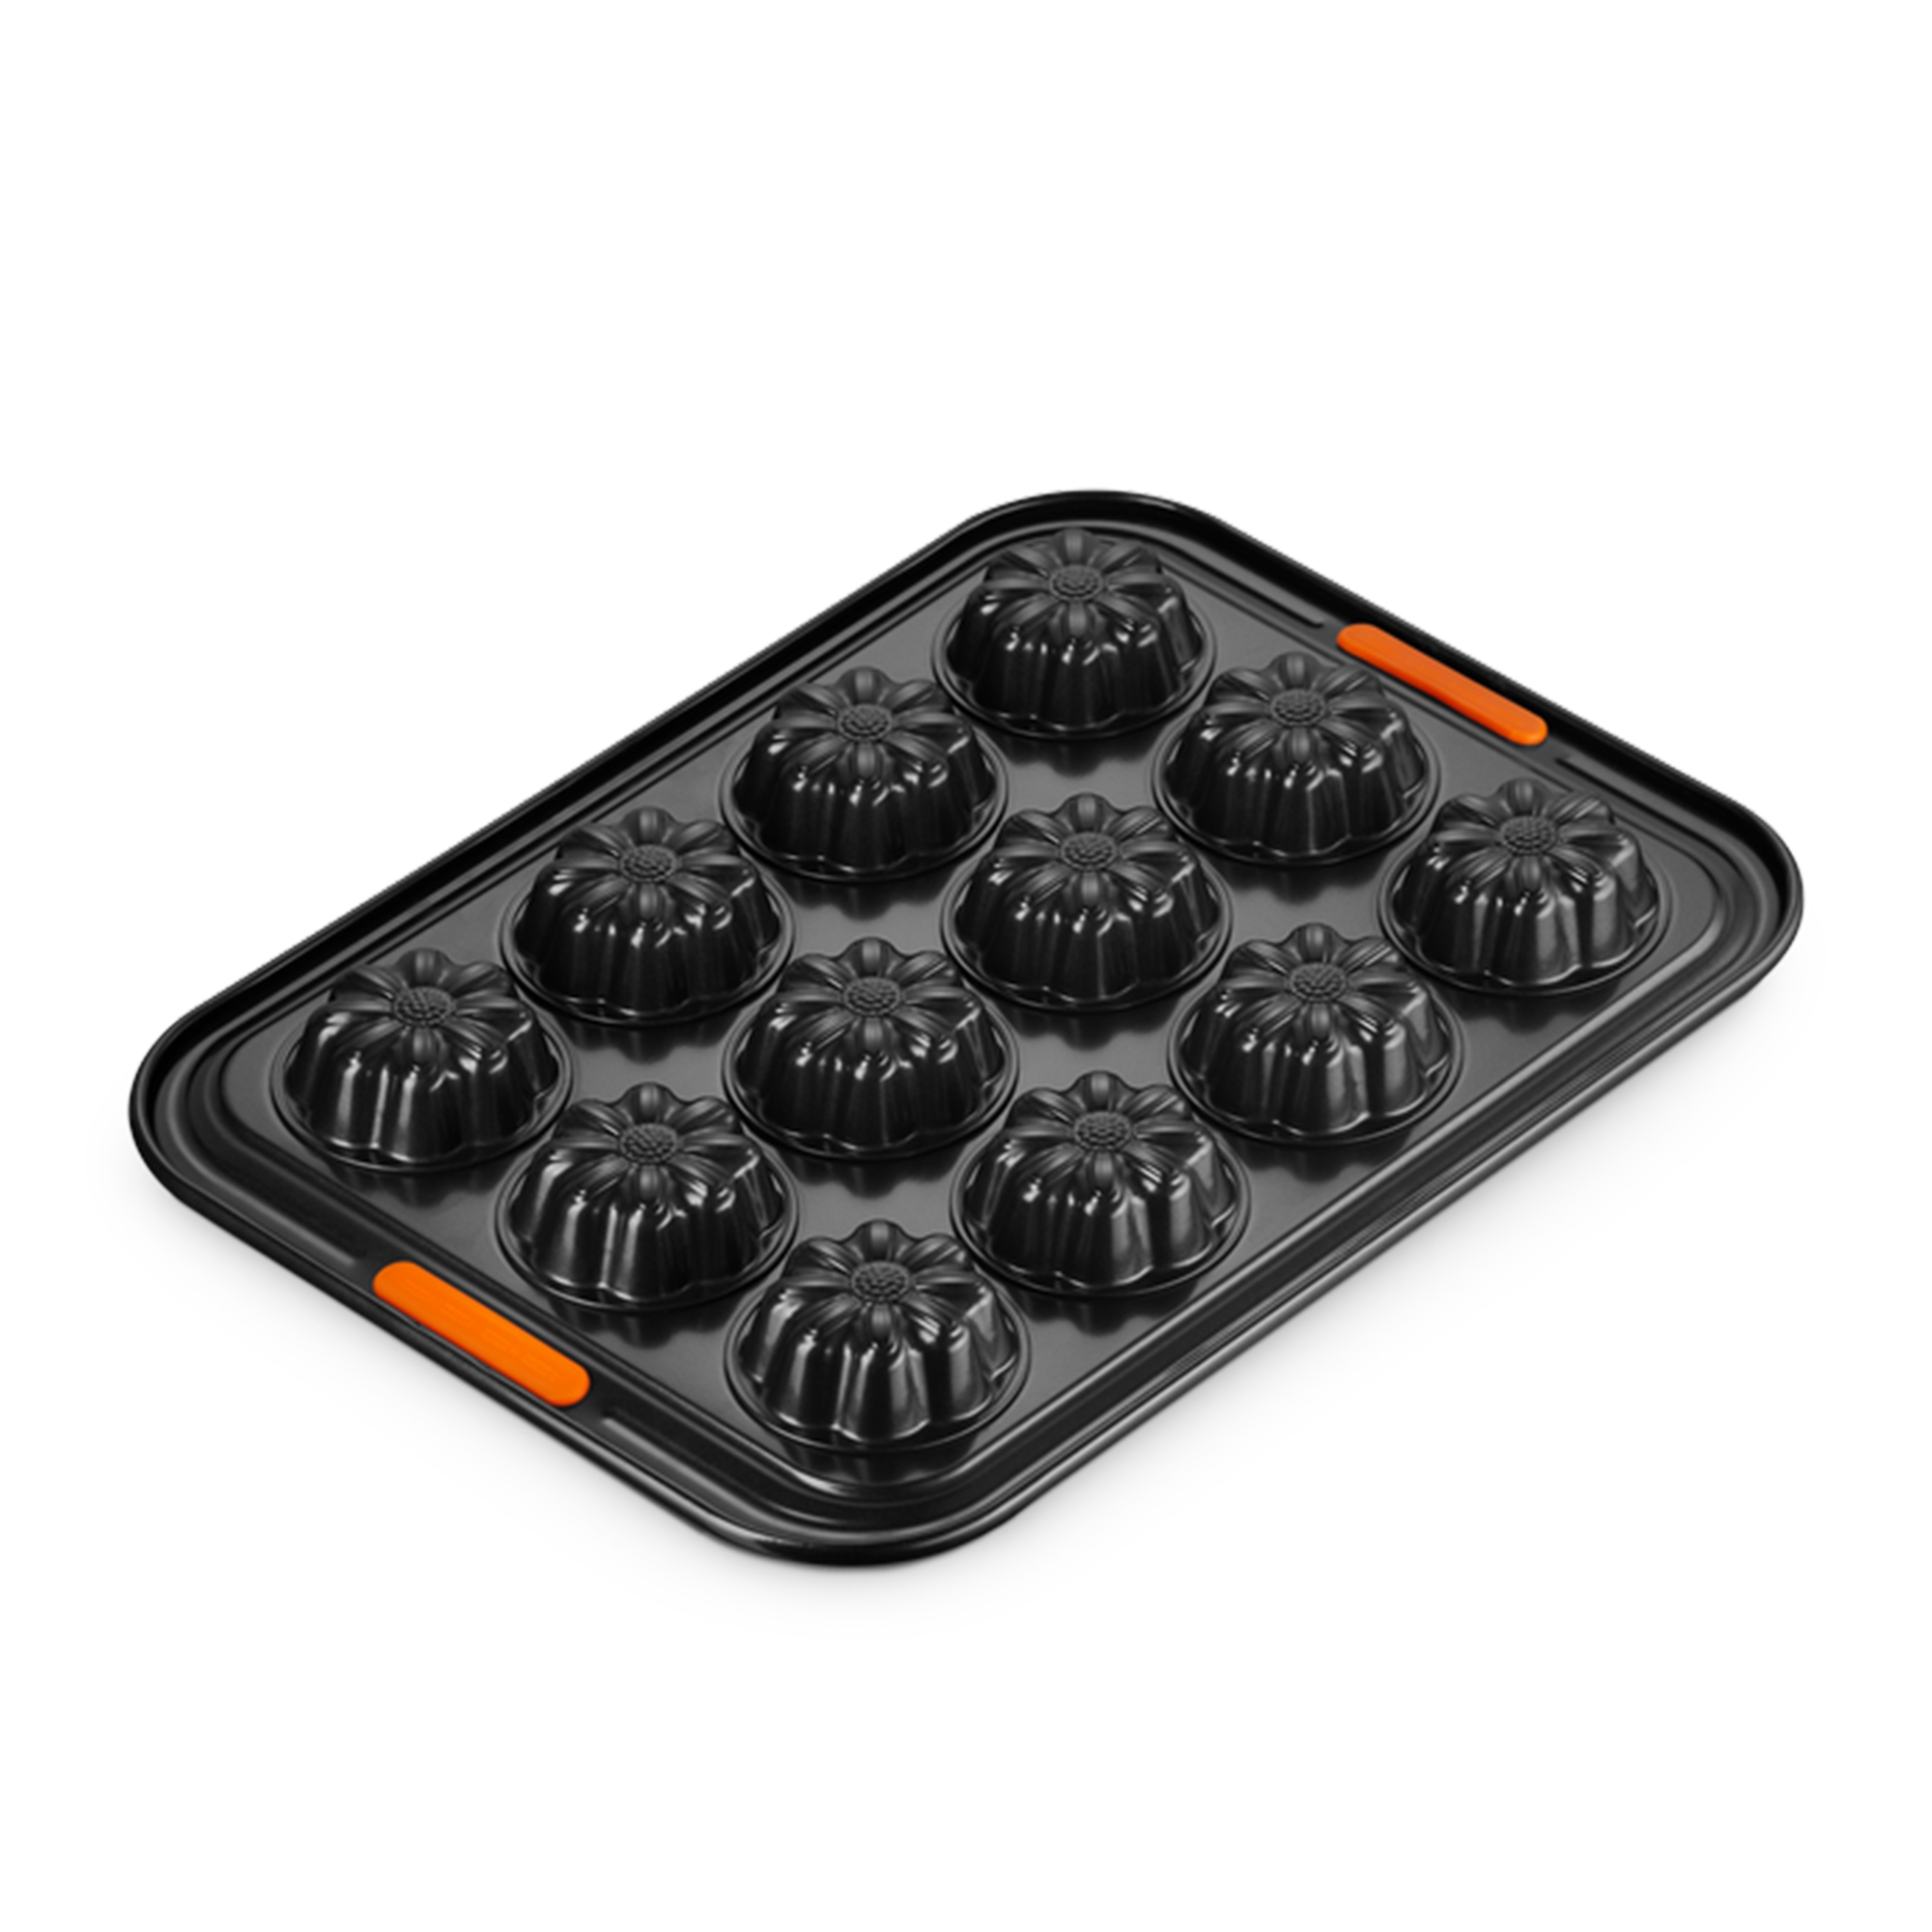 Le Creuset Toughened Non Stick Flower Tray 12 Cup Image 2